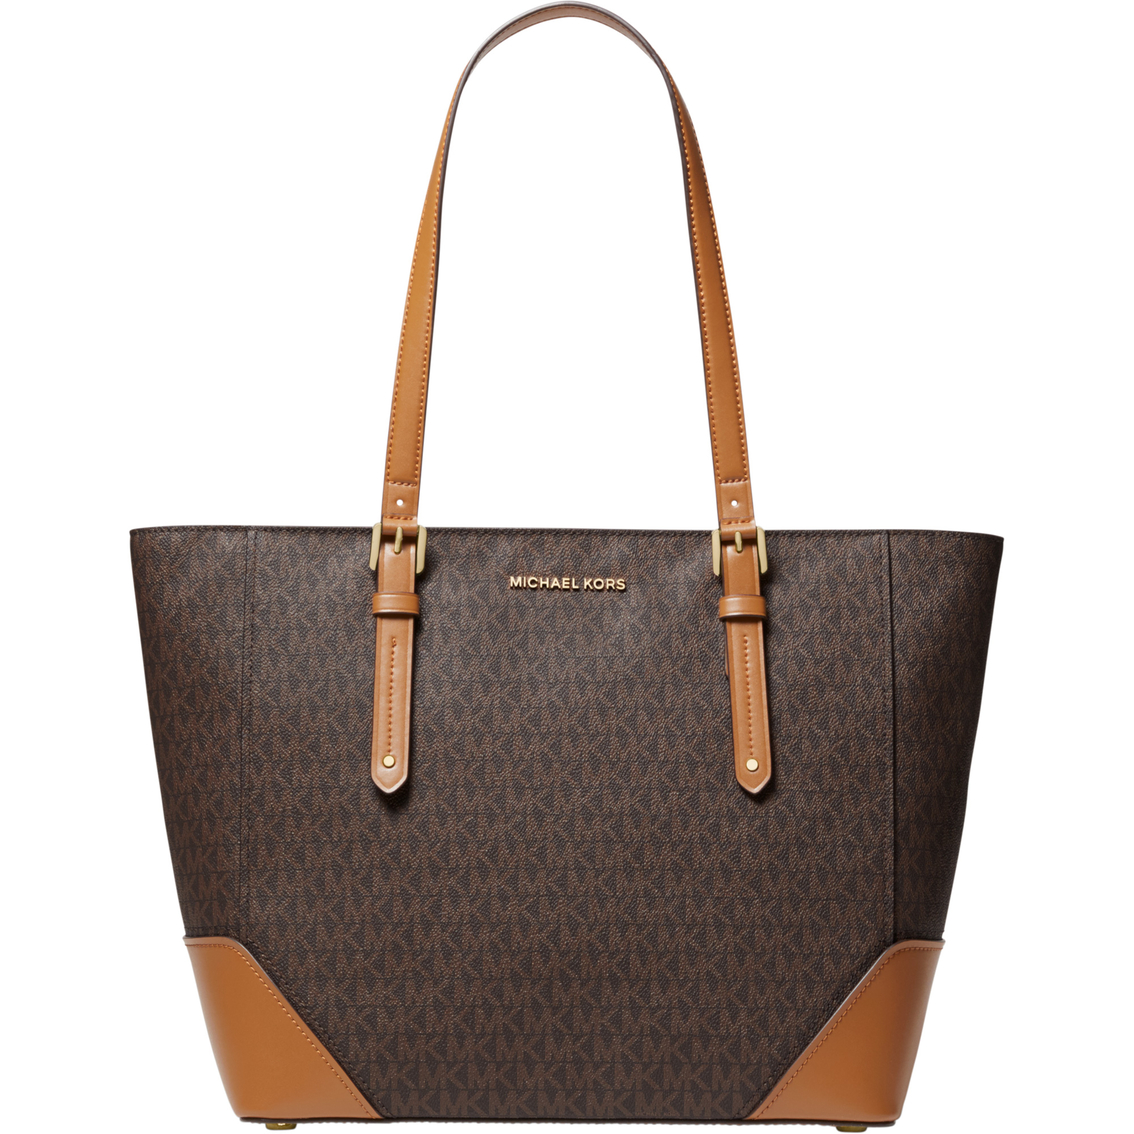 Michael Kors Aria Large Signature Leather Tote | Totes & Shoppers ...